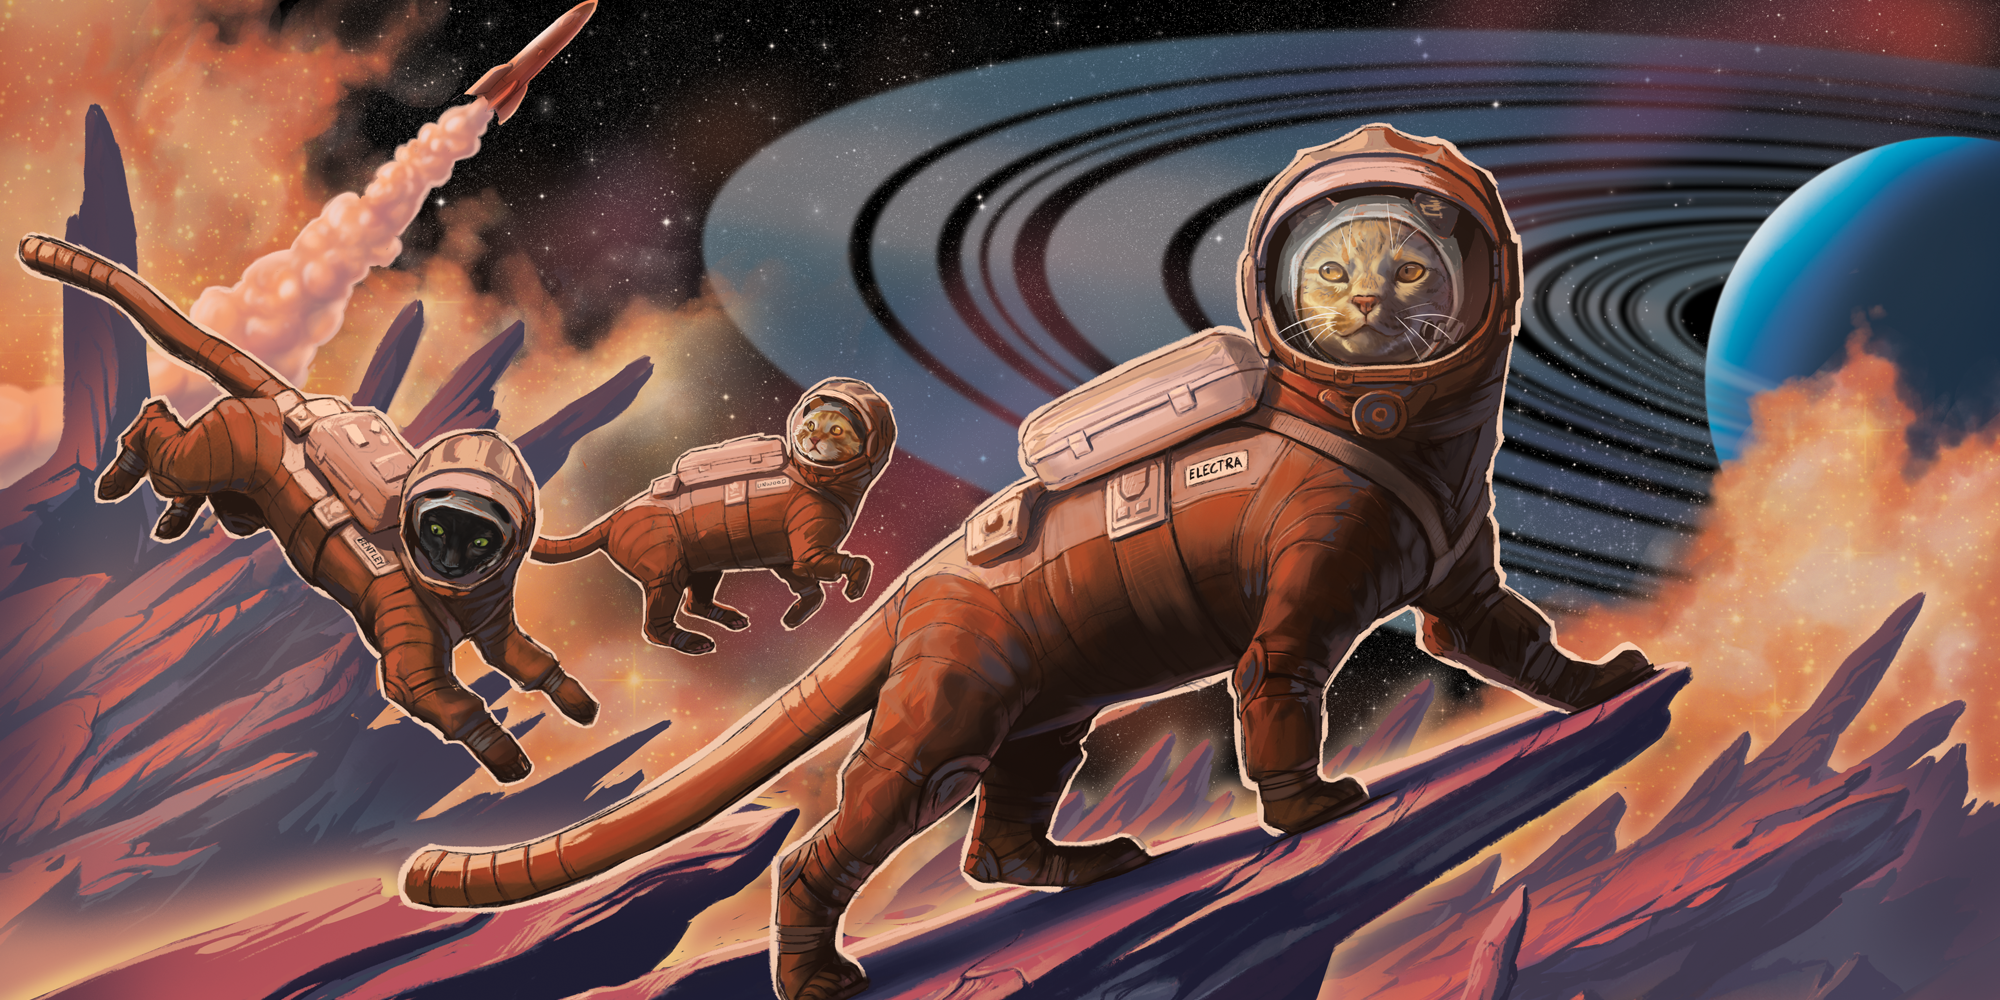 Cats in spacesuits explore the galaxy.